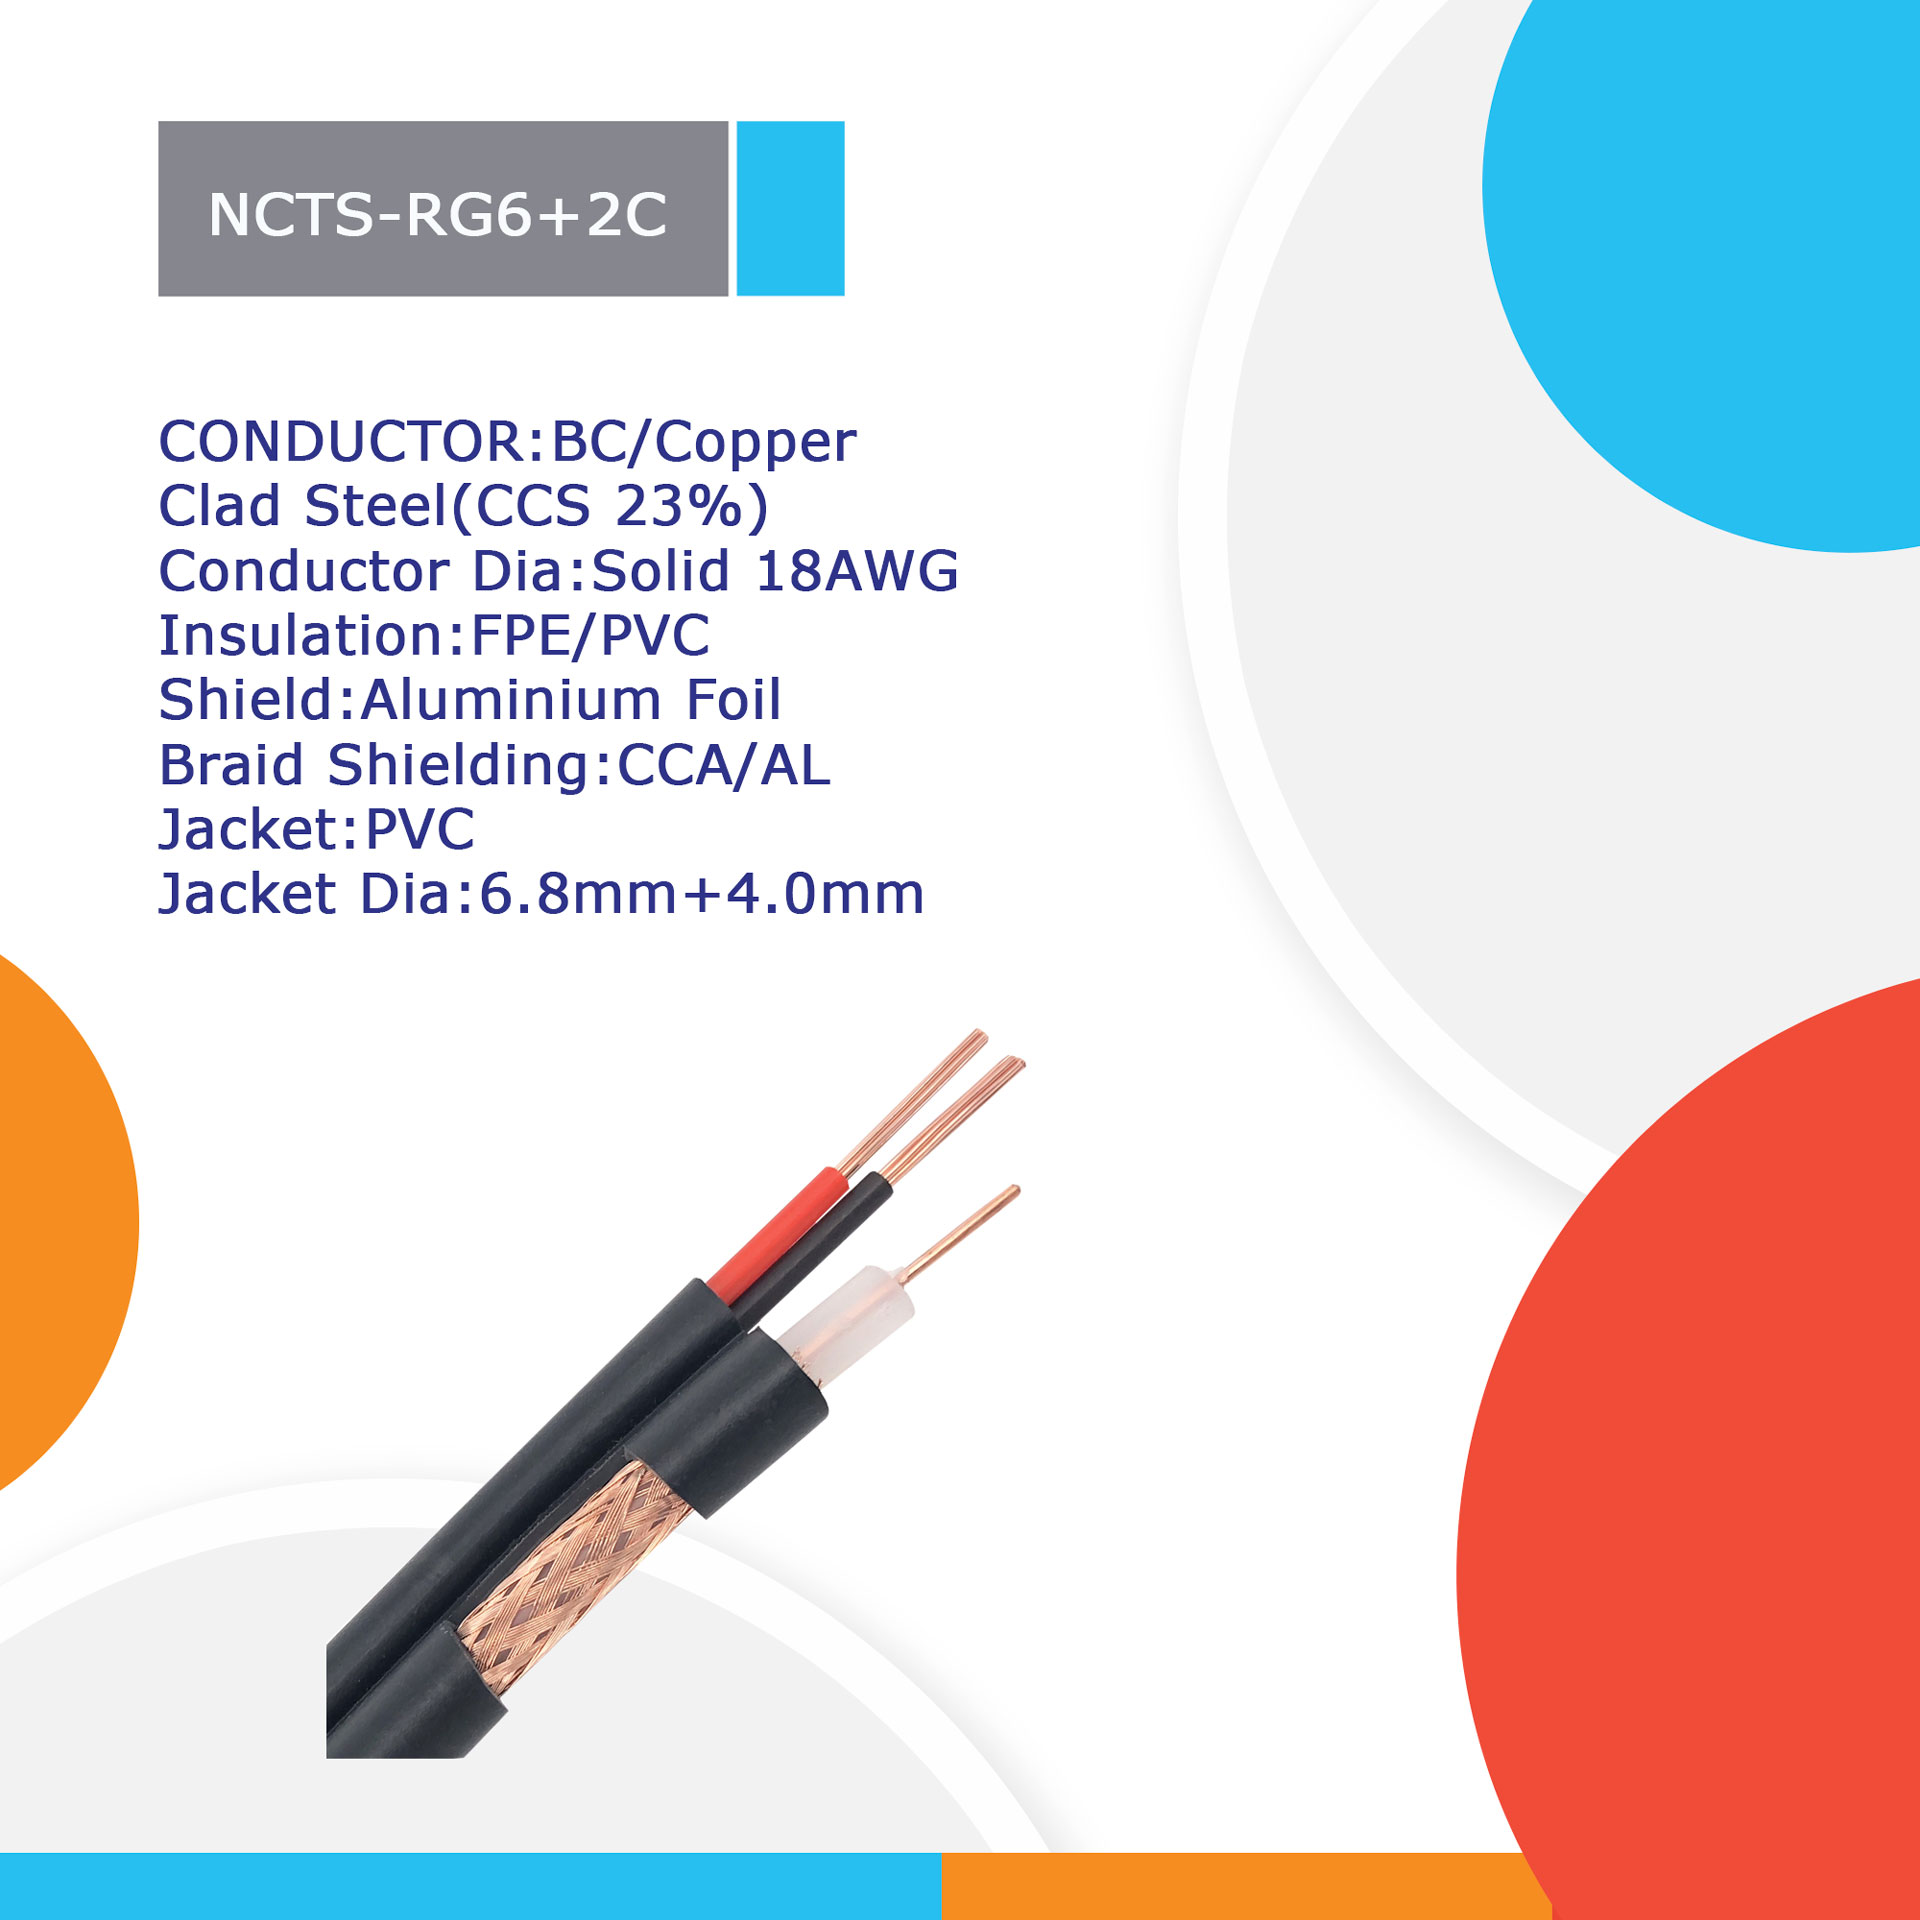 NCTS-RG6+2C